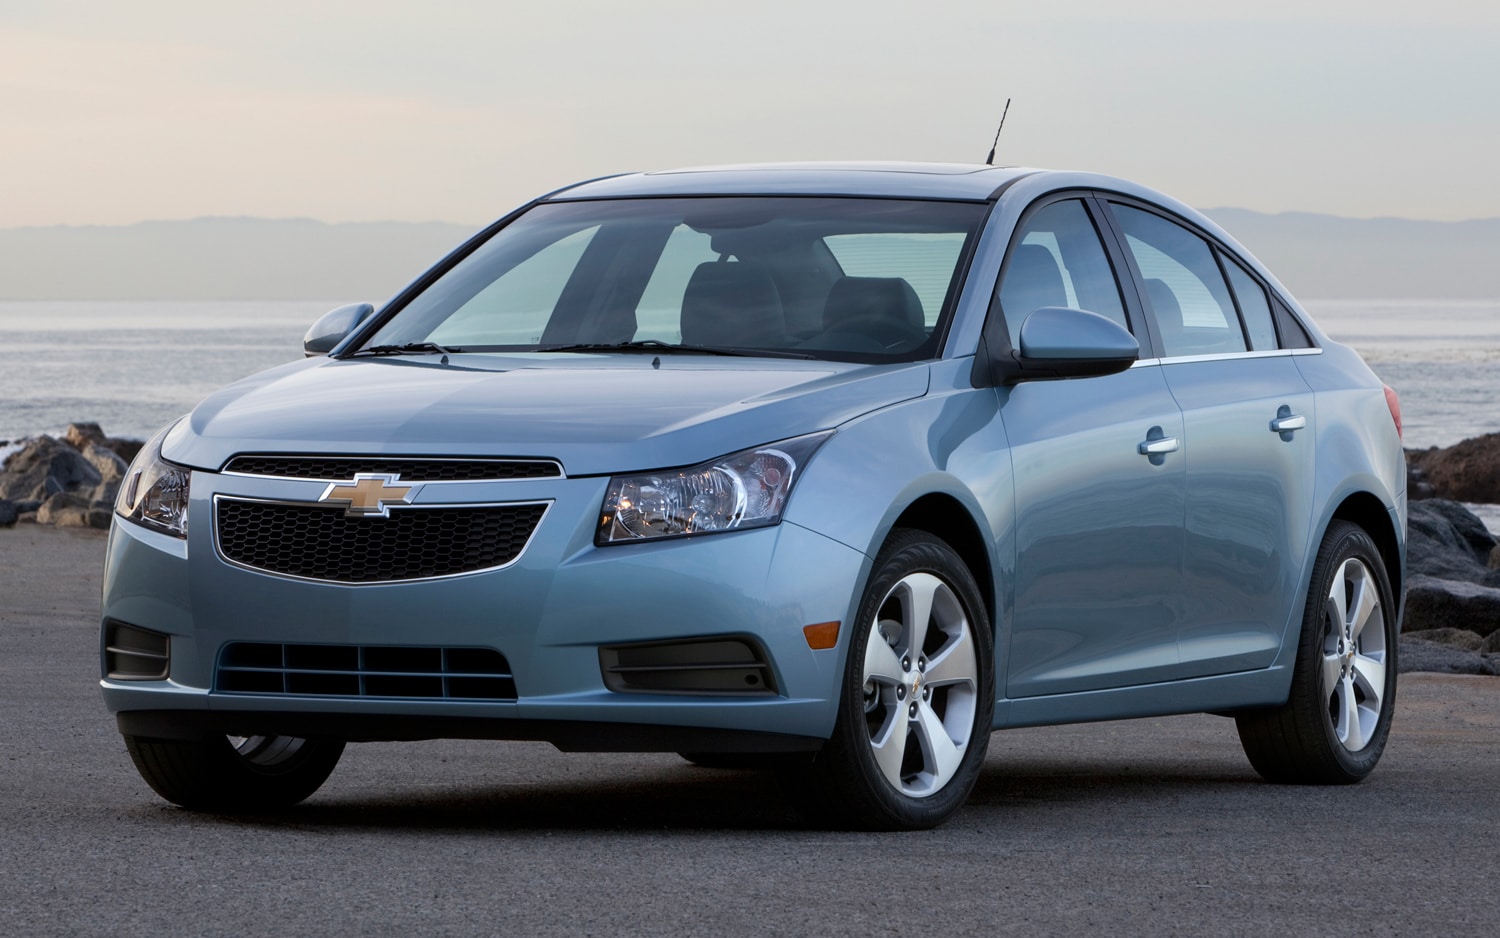 We Hear: 2013 Chevrolet Cruze Diesel Gets 50 MPG, Has Automatic Transmission